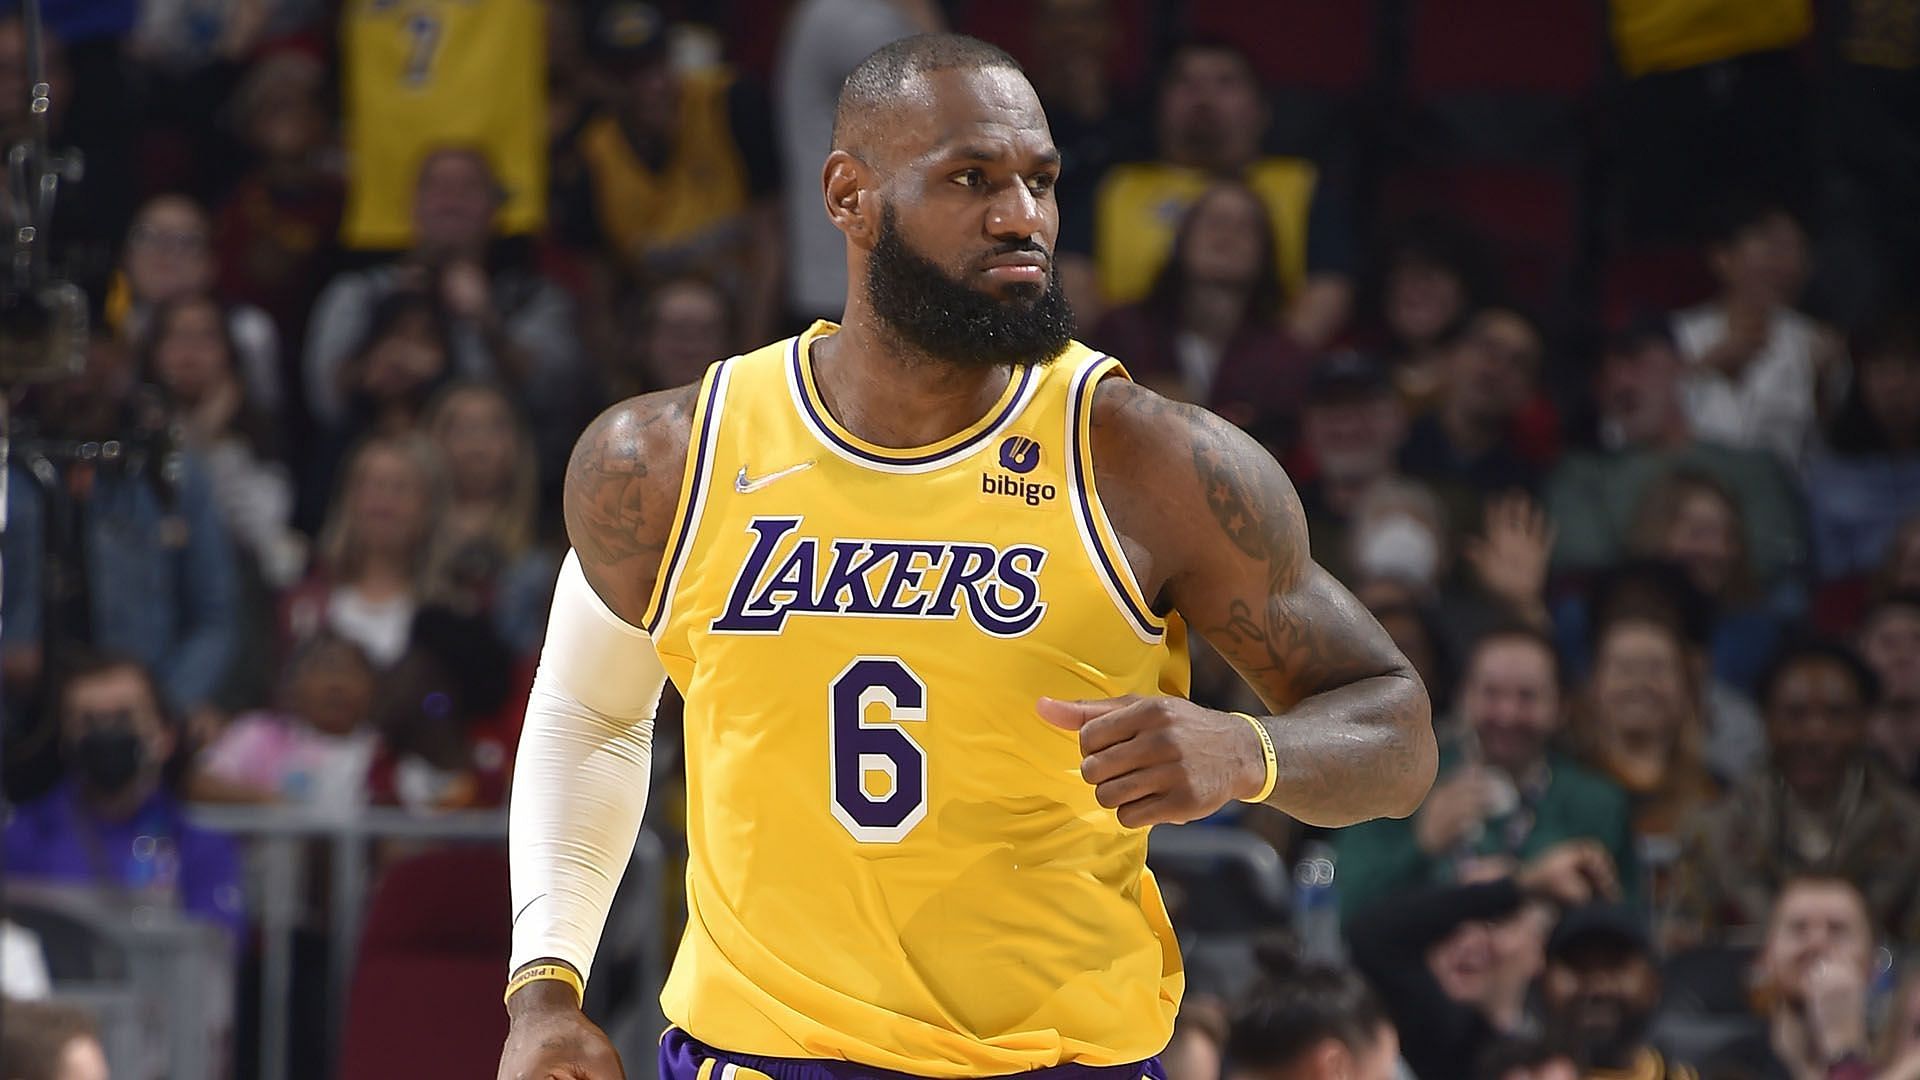 The Lakers assured LeBron James that they will be aggressive in creating a championship-contending team. [Photo: NBA.com]